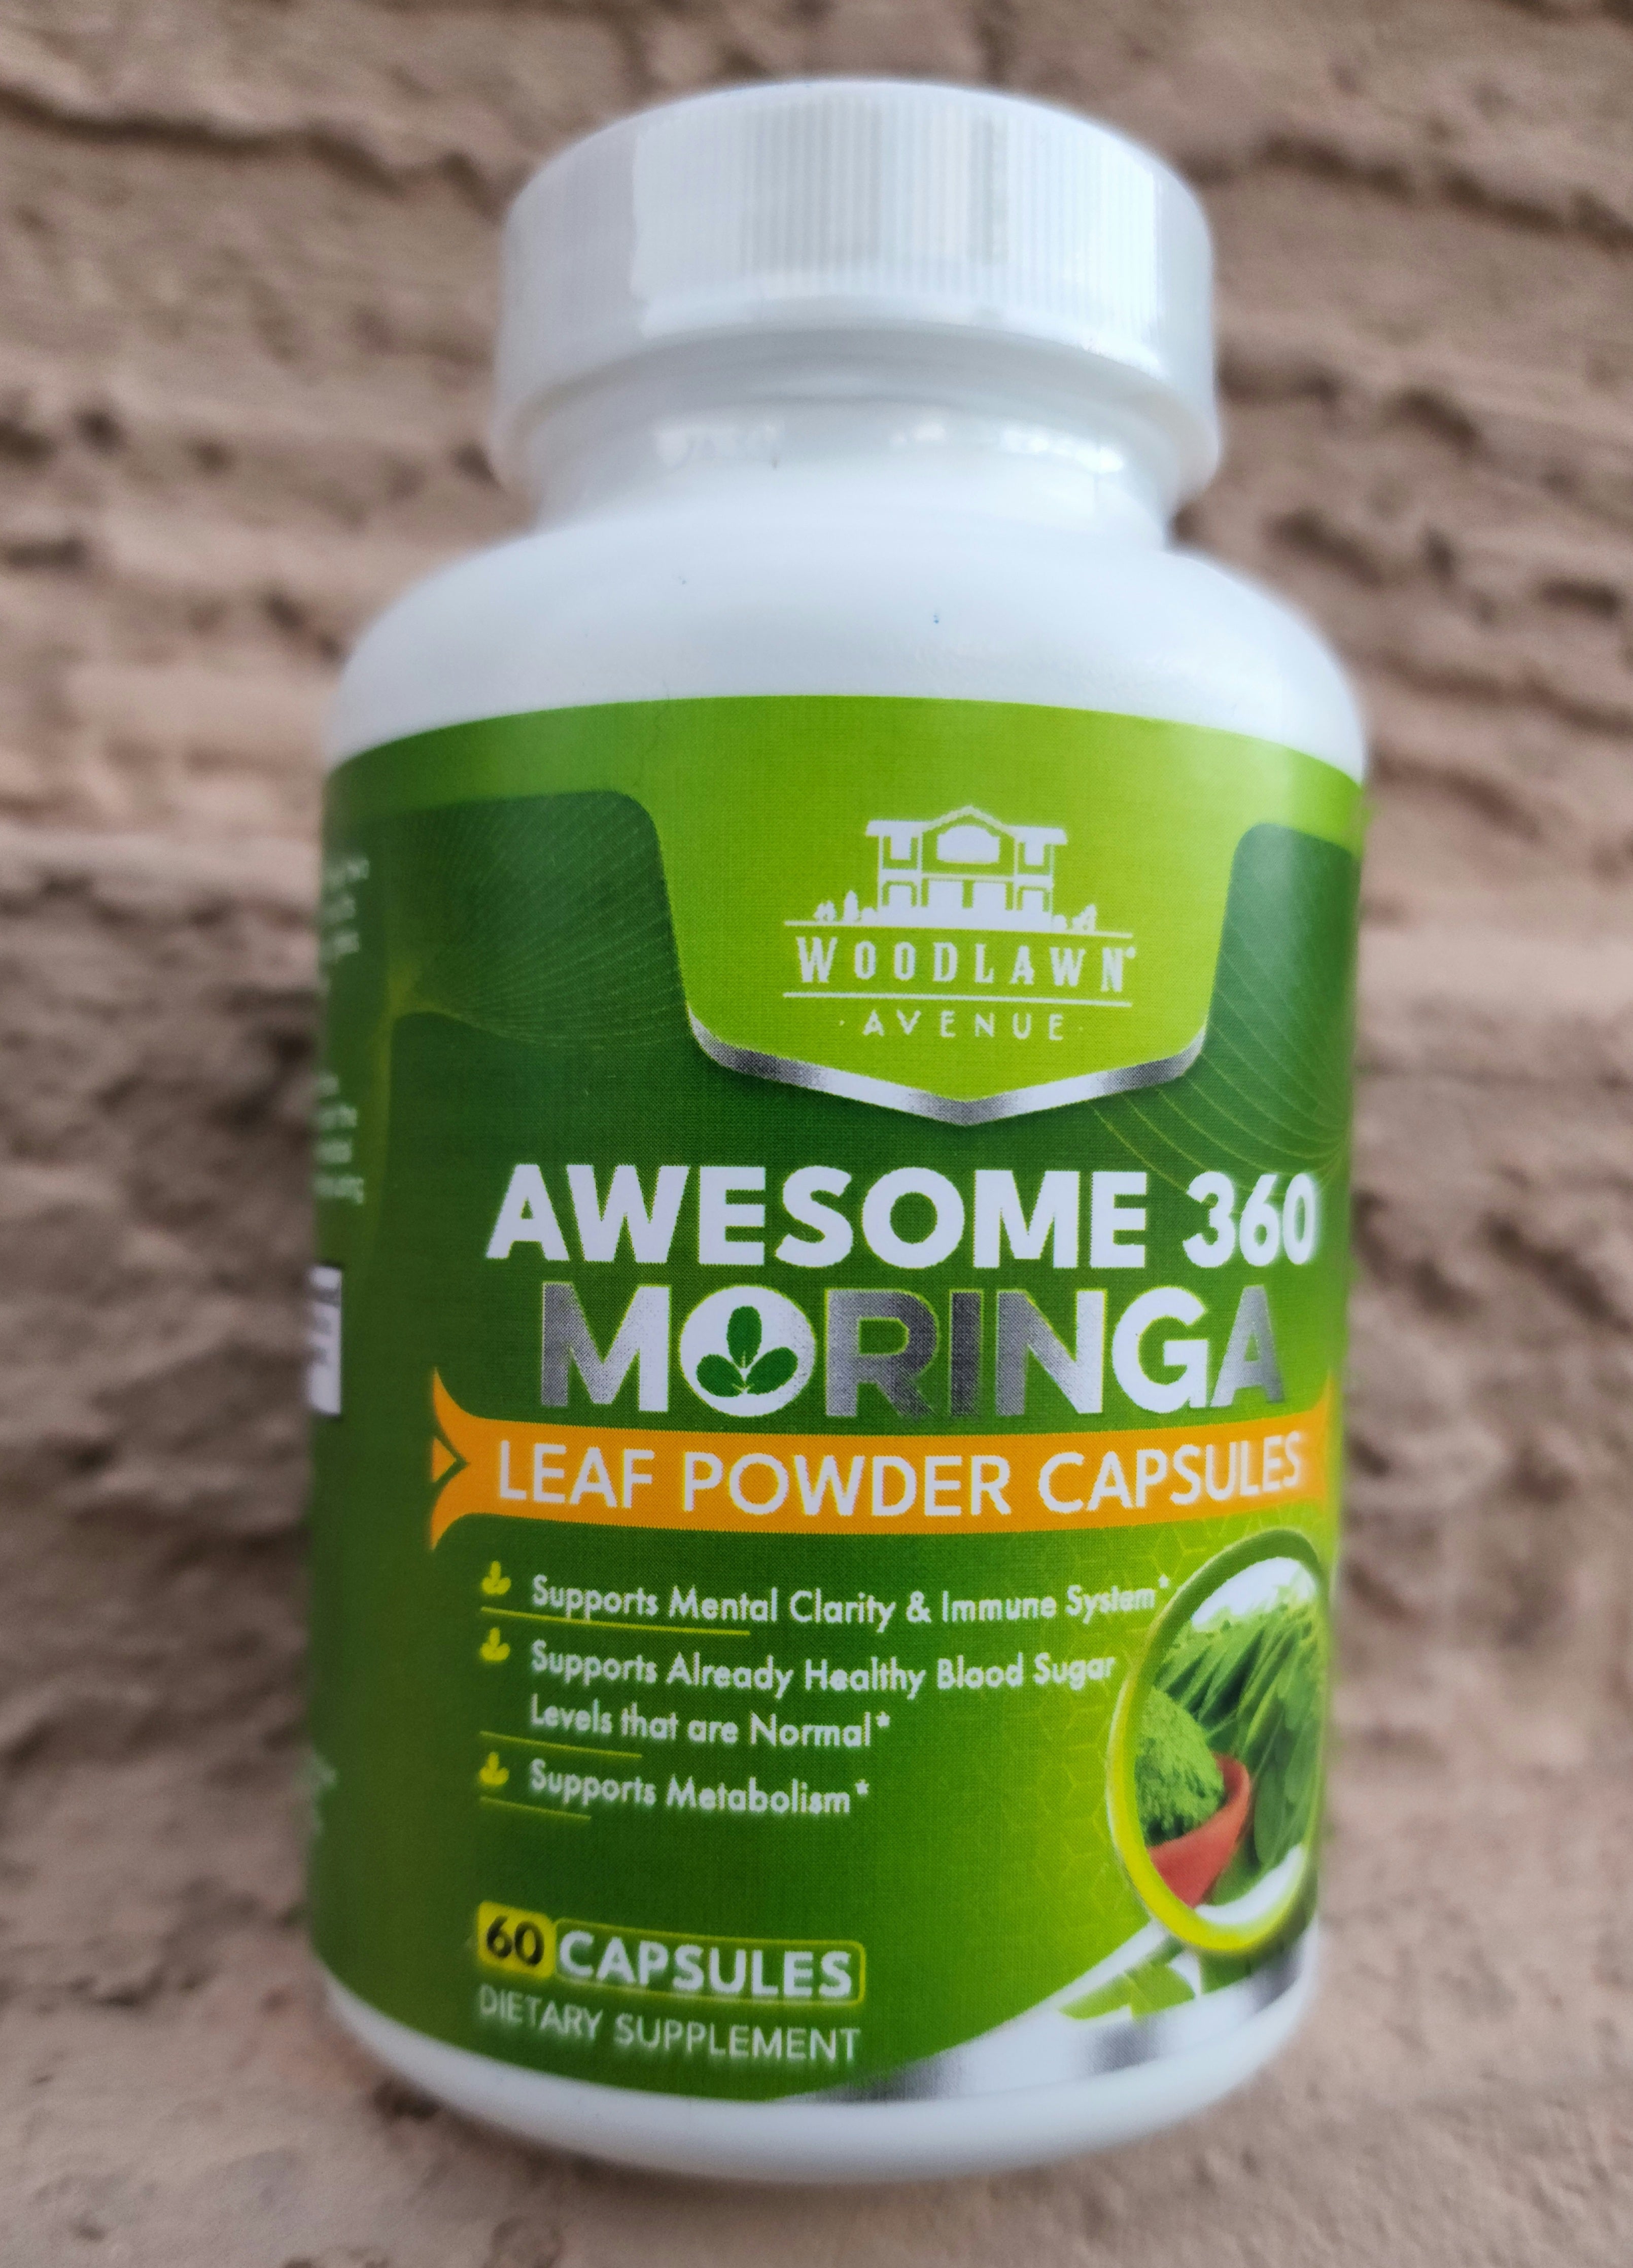 AWESOME 360 - Reduce Arthritis and Other Chronic Inflammatory Pain, Regulate Blood Sugar, Improve Memory, Fight Bacterial, Viral, and Fungal Infections